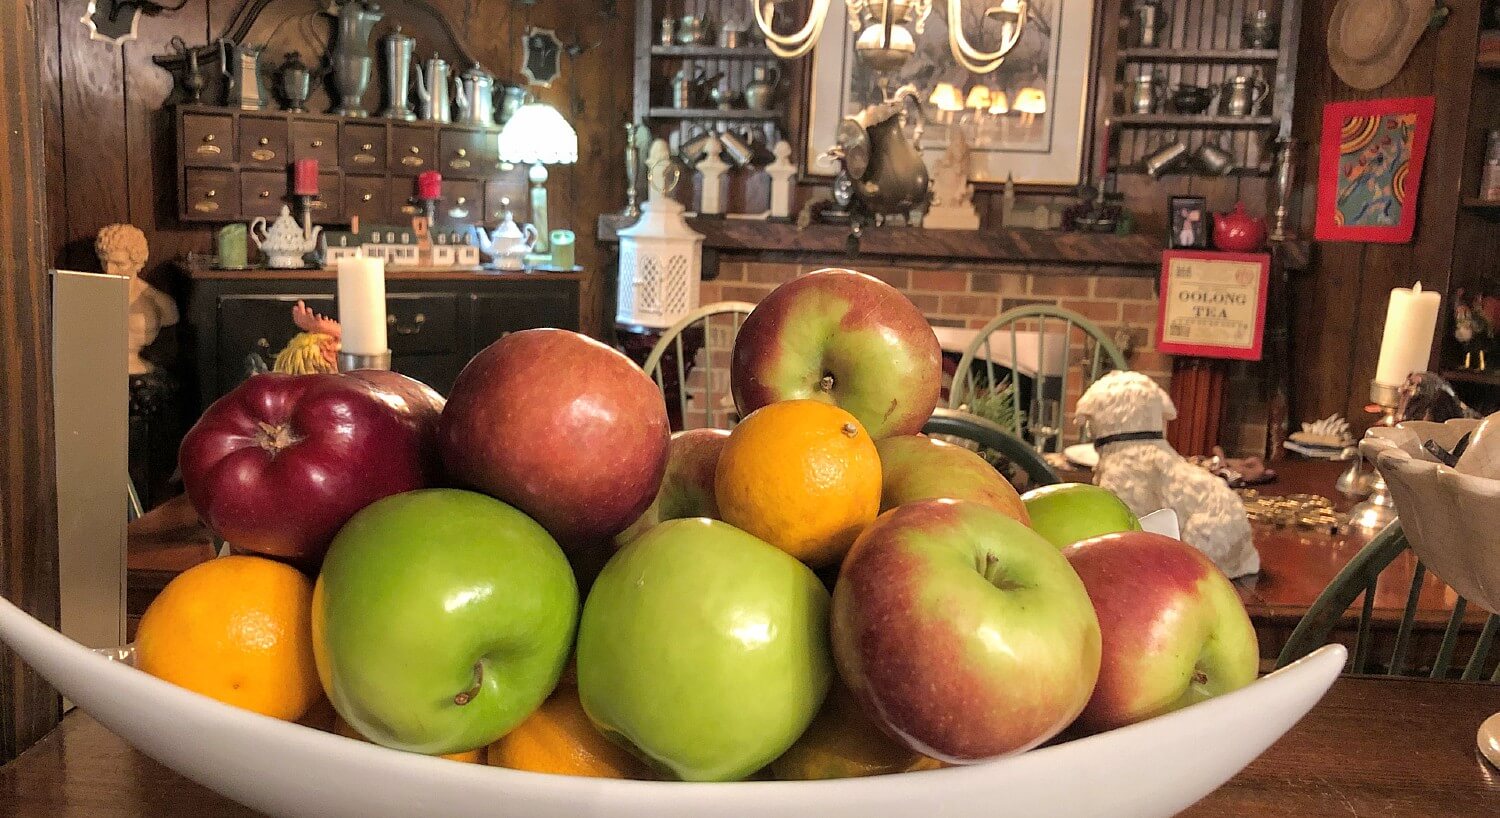 Bowl of red and green apples and oranges sitting on a counter in a dining room